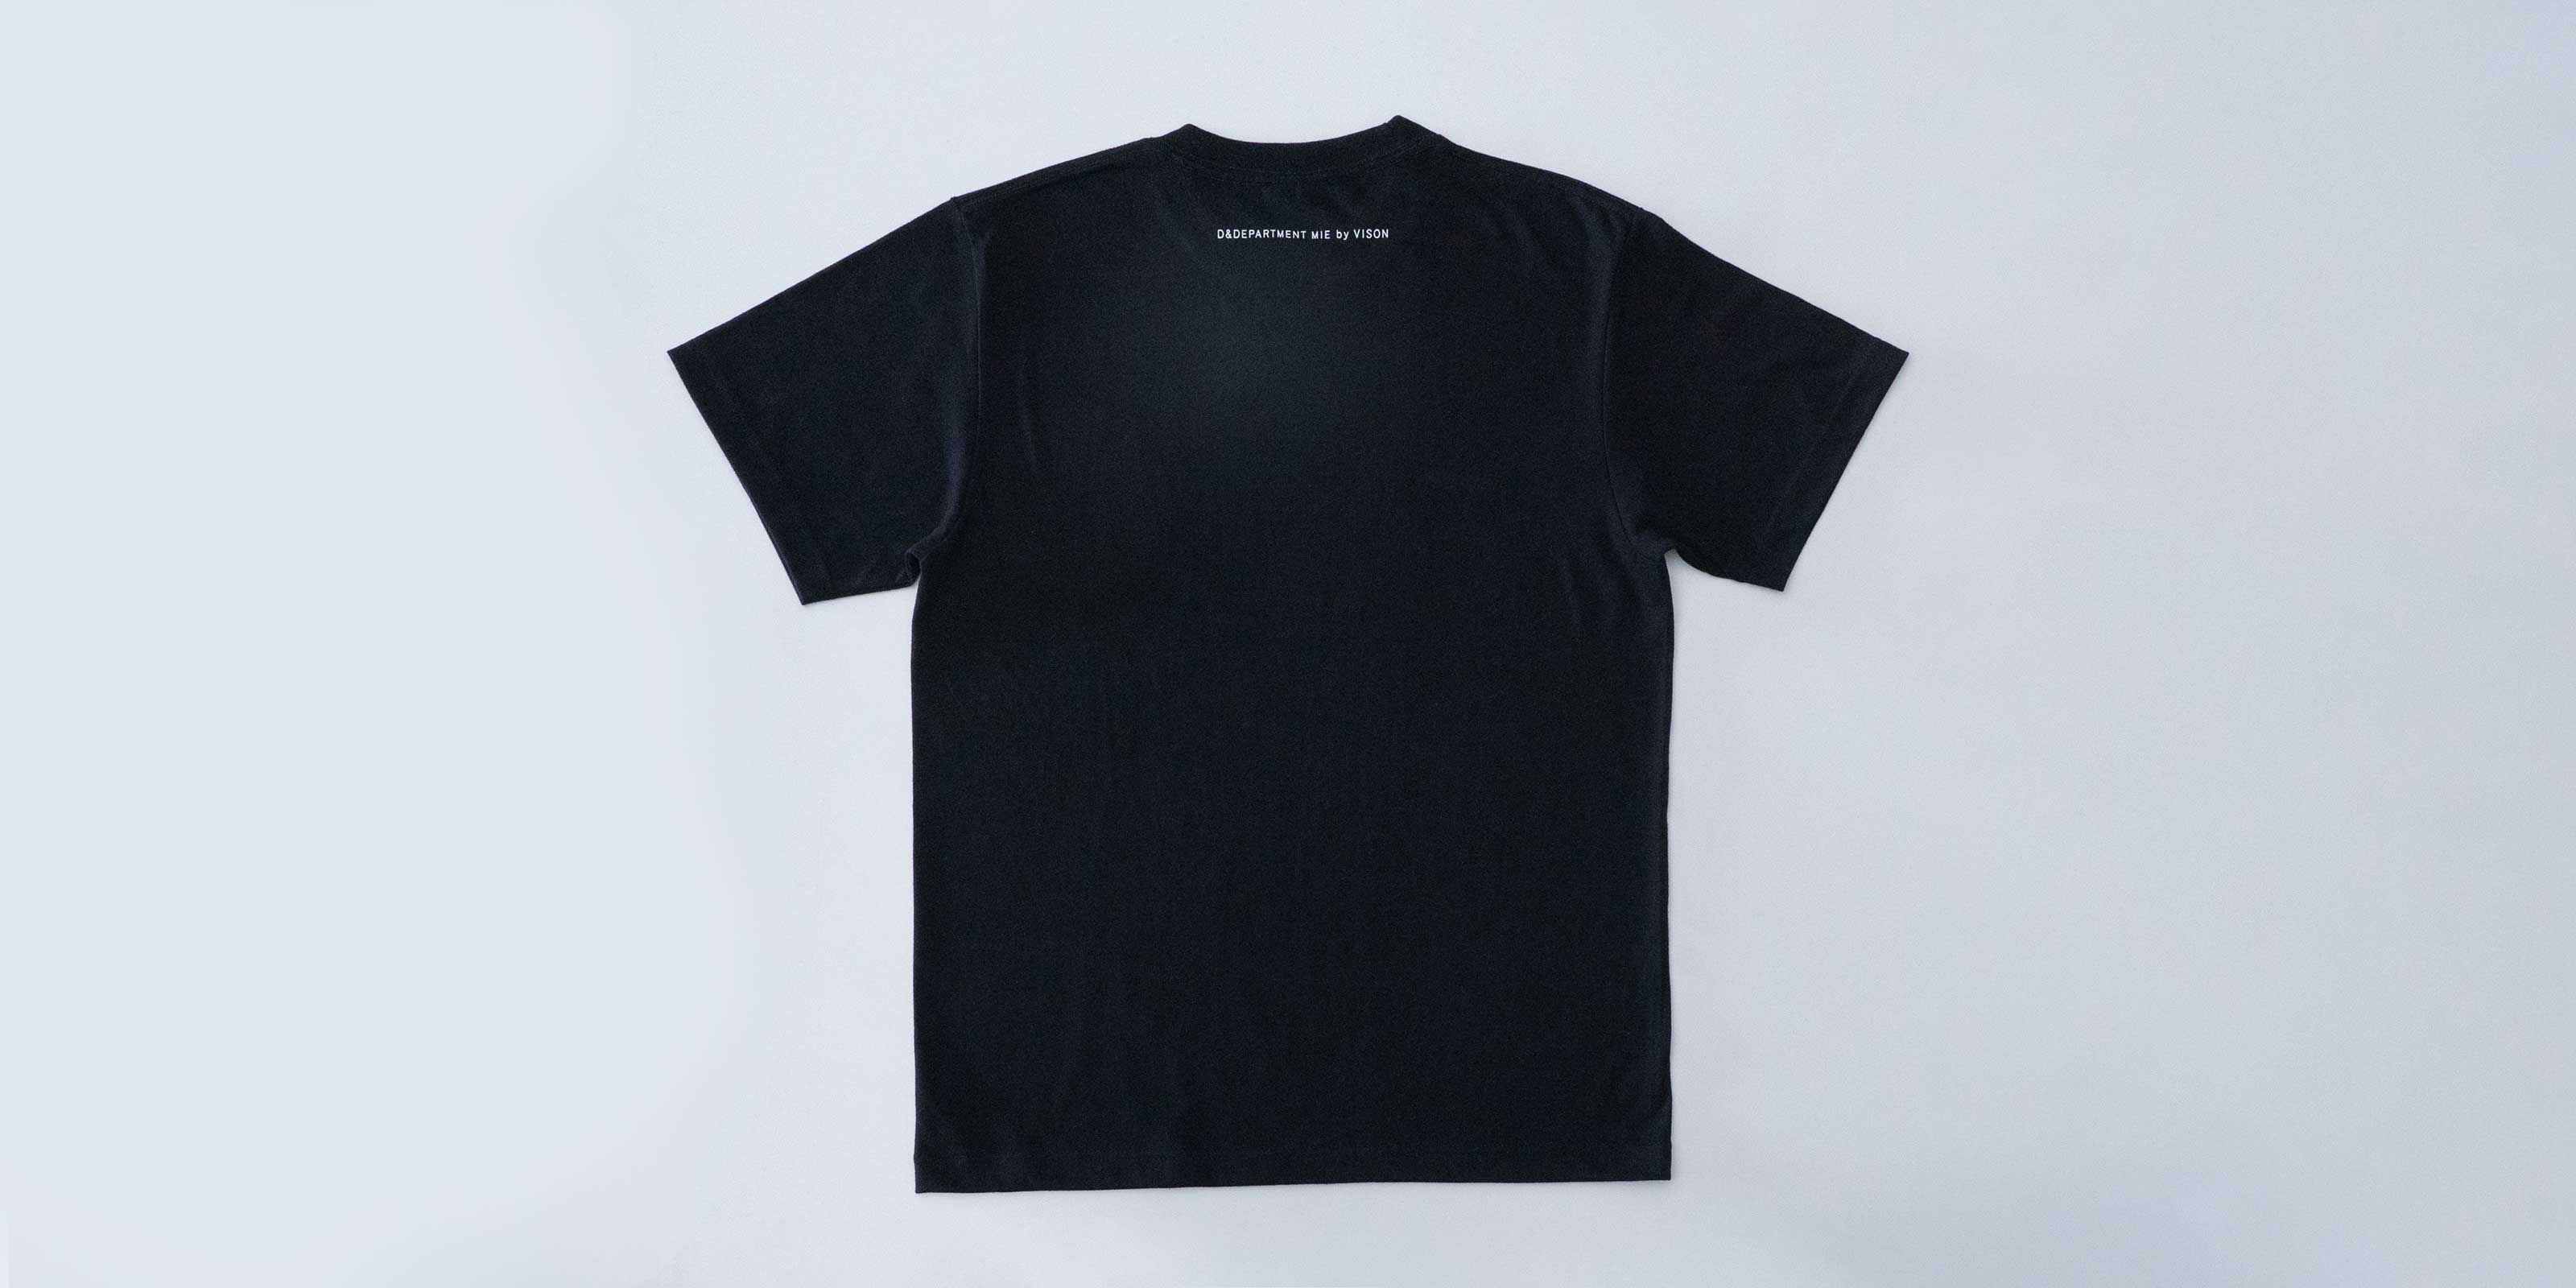 【sold out】【オープン記念】D&DEPARTMENT MIE by VISON　T SHIRT（d 409）・ブラック・L